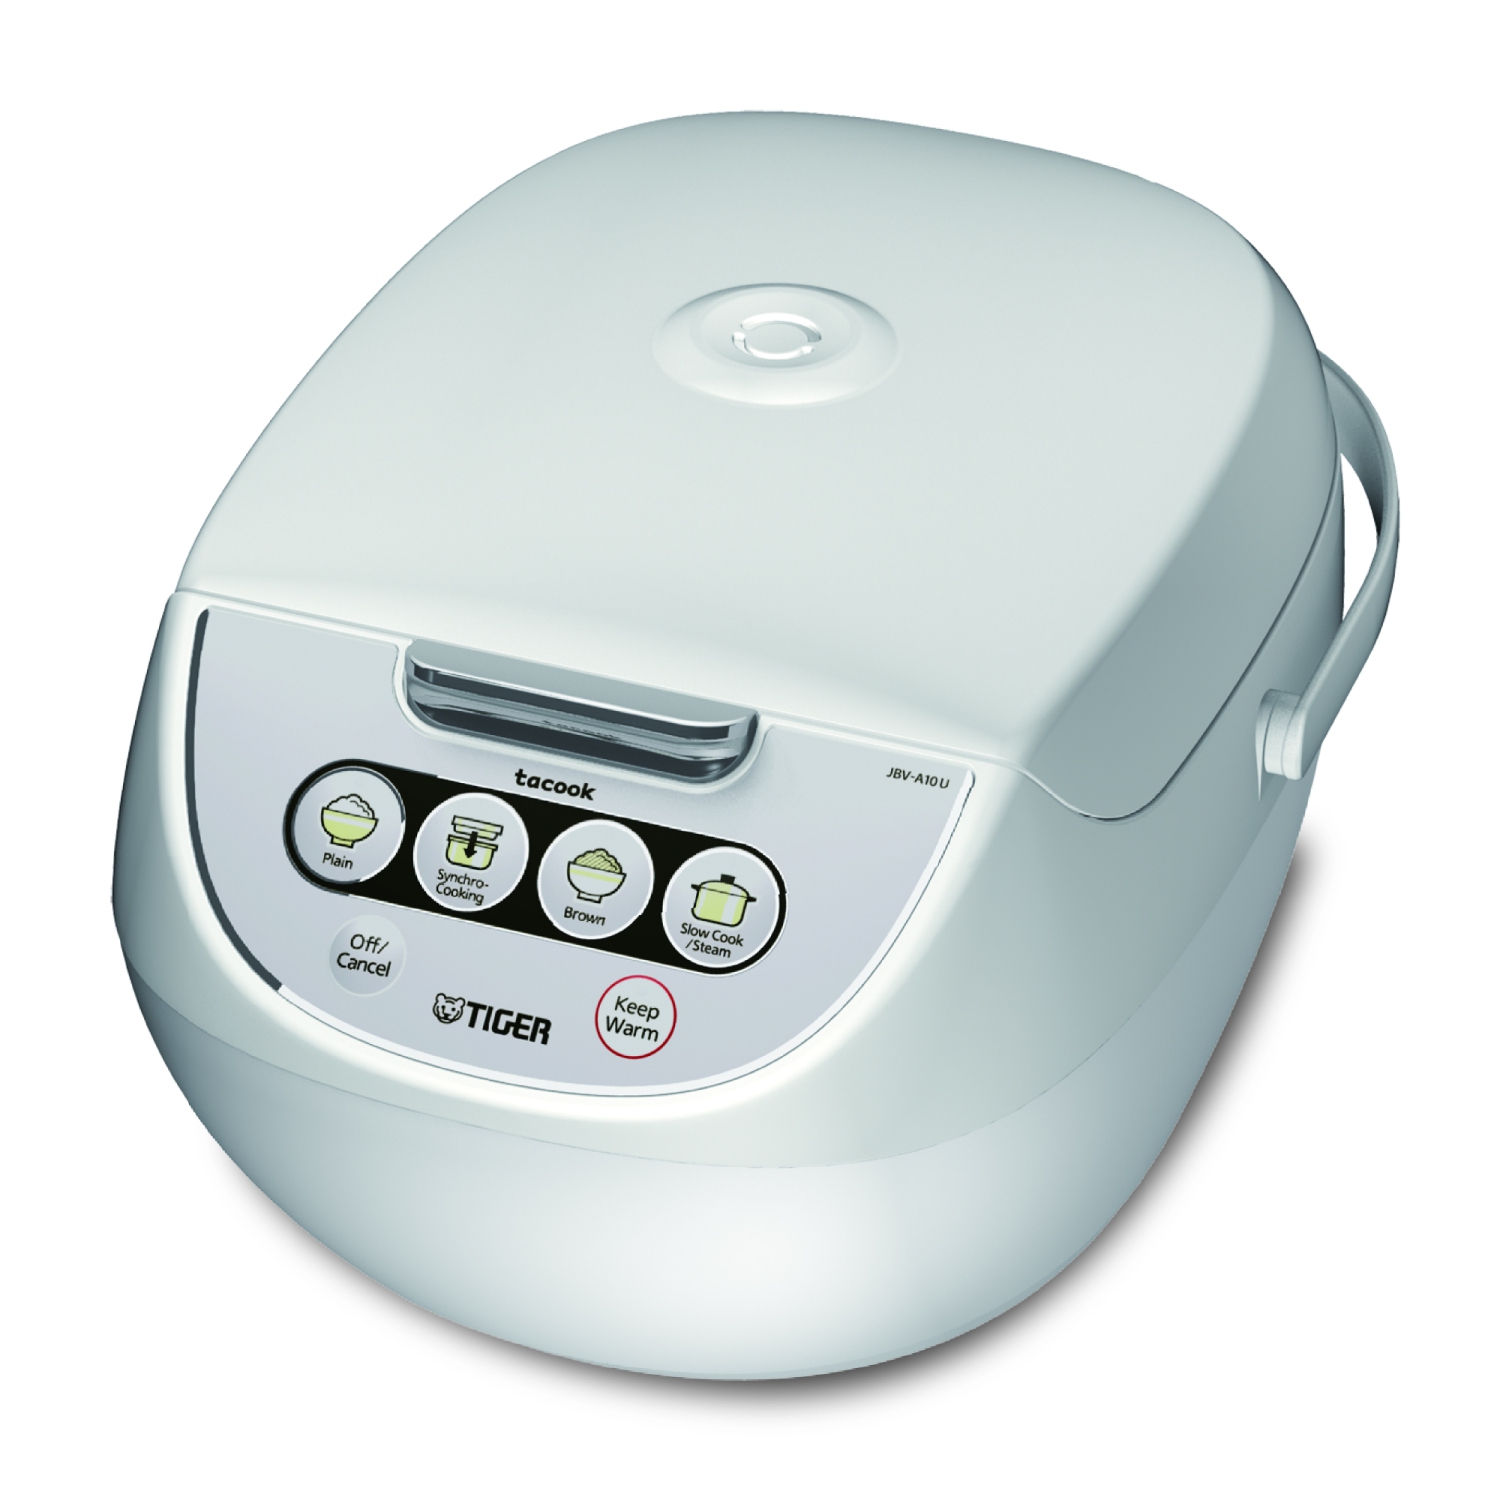 Tiger JBV-A18U 10-Cup Micom Rice Cooker with Food Steamer and Slow